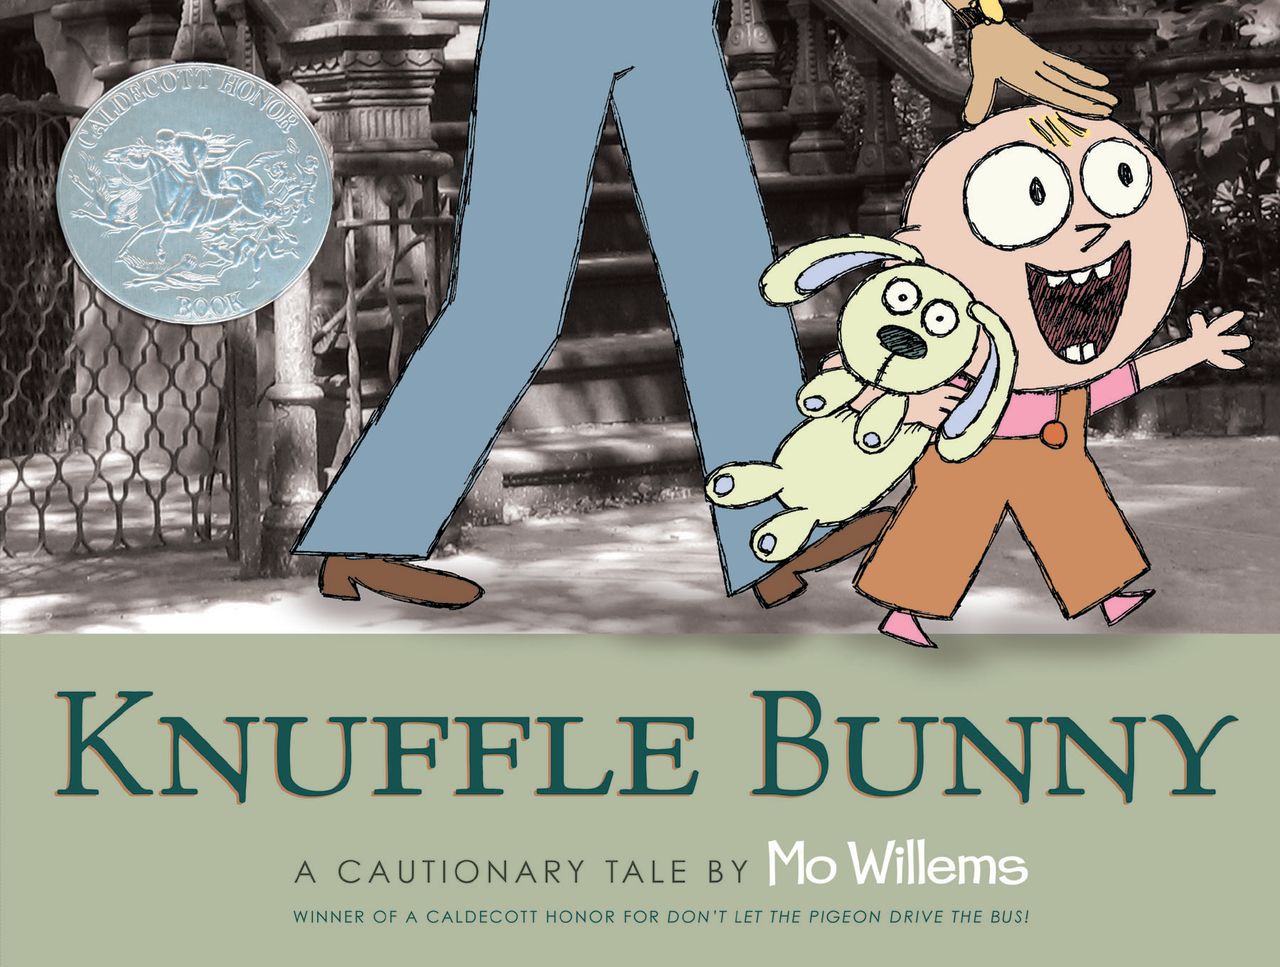 The tale of a lost bunny by Mo Willems.